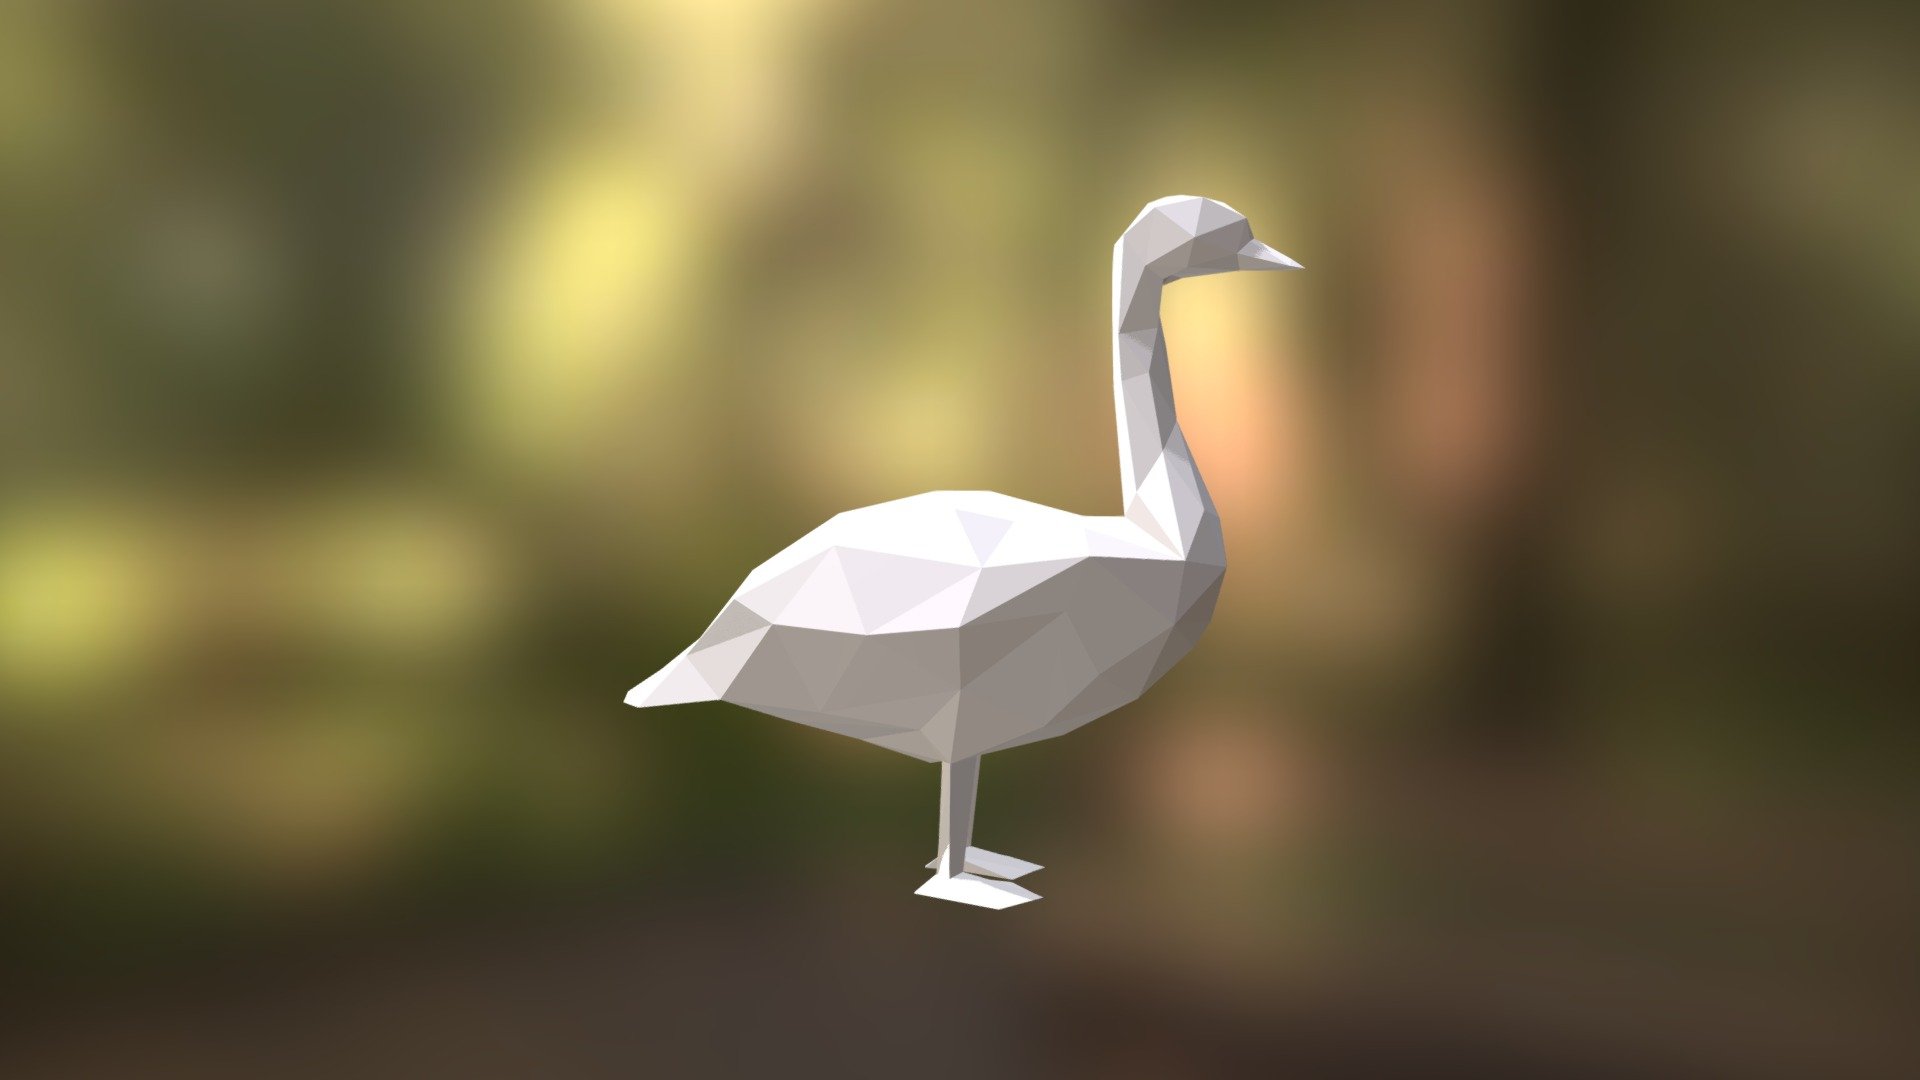 Low Poly 3D model for 3D printing. Goose Low Poly sculpture. You can find this model for 3D printing in my shop: -link removed- Reference model: http://www.cadnav.com - Goose low poly model for 3D printing - 3D model by Peolla3D 3d model